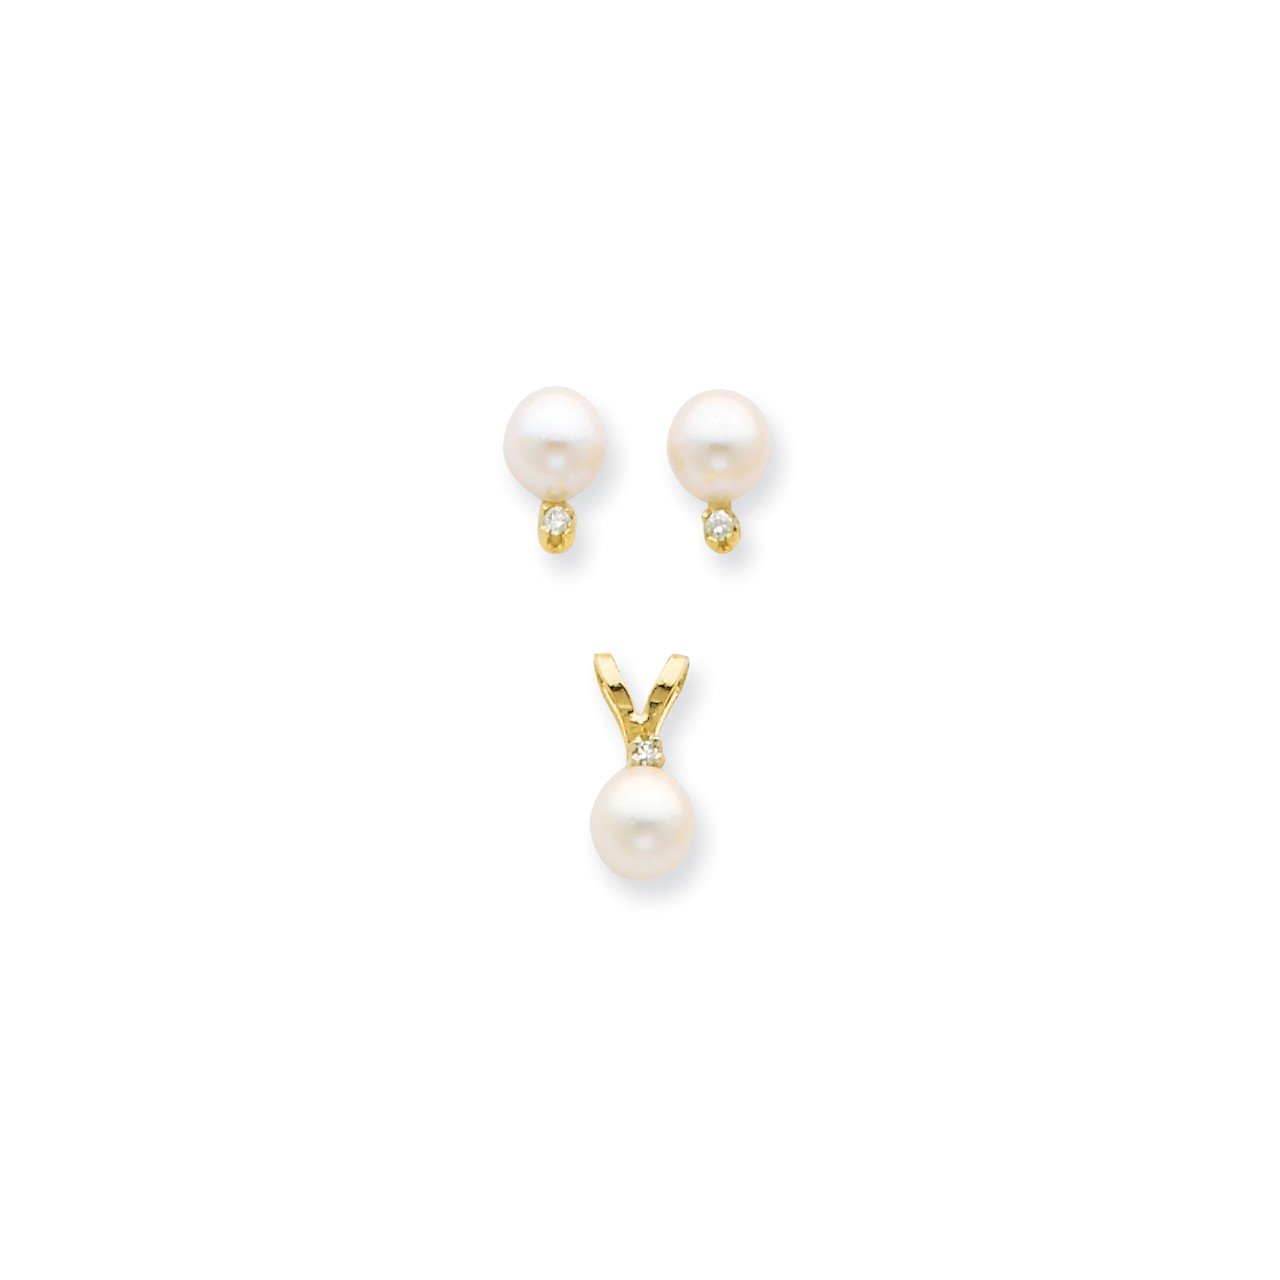 14K 5-6mm Saltwater Akoya Cultured Pearl and Dia. Earring and Pendant Set